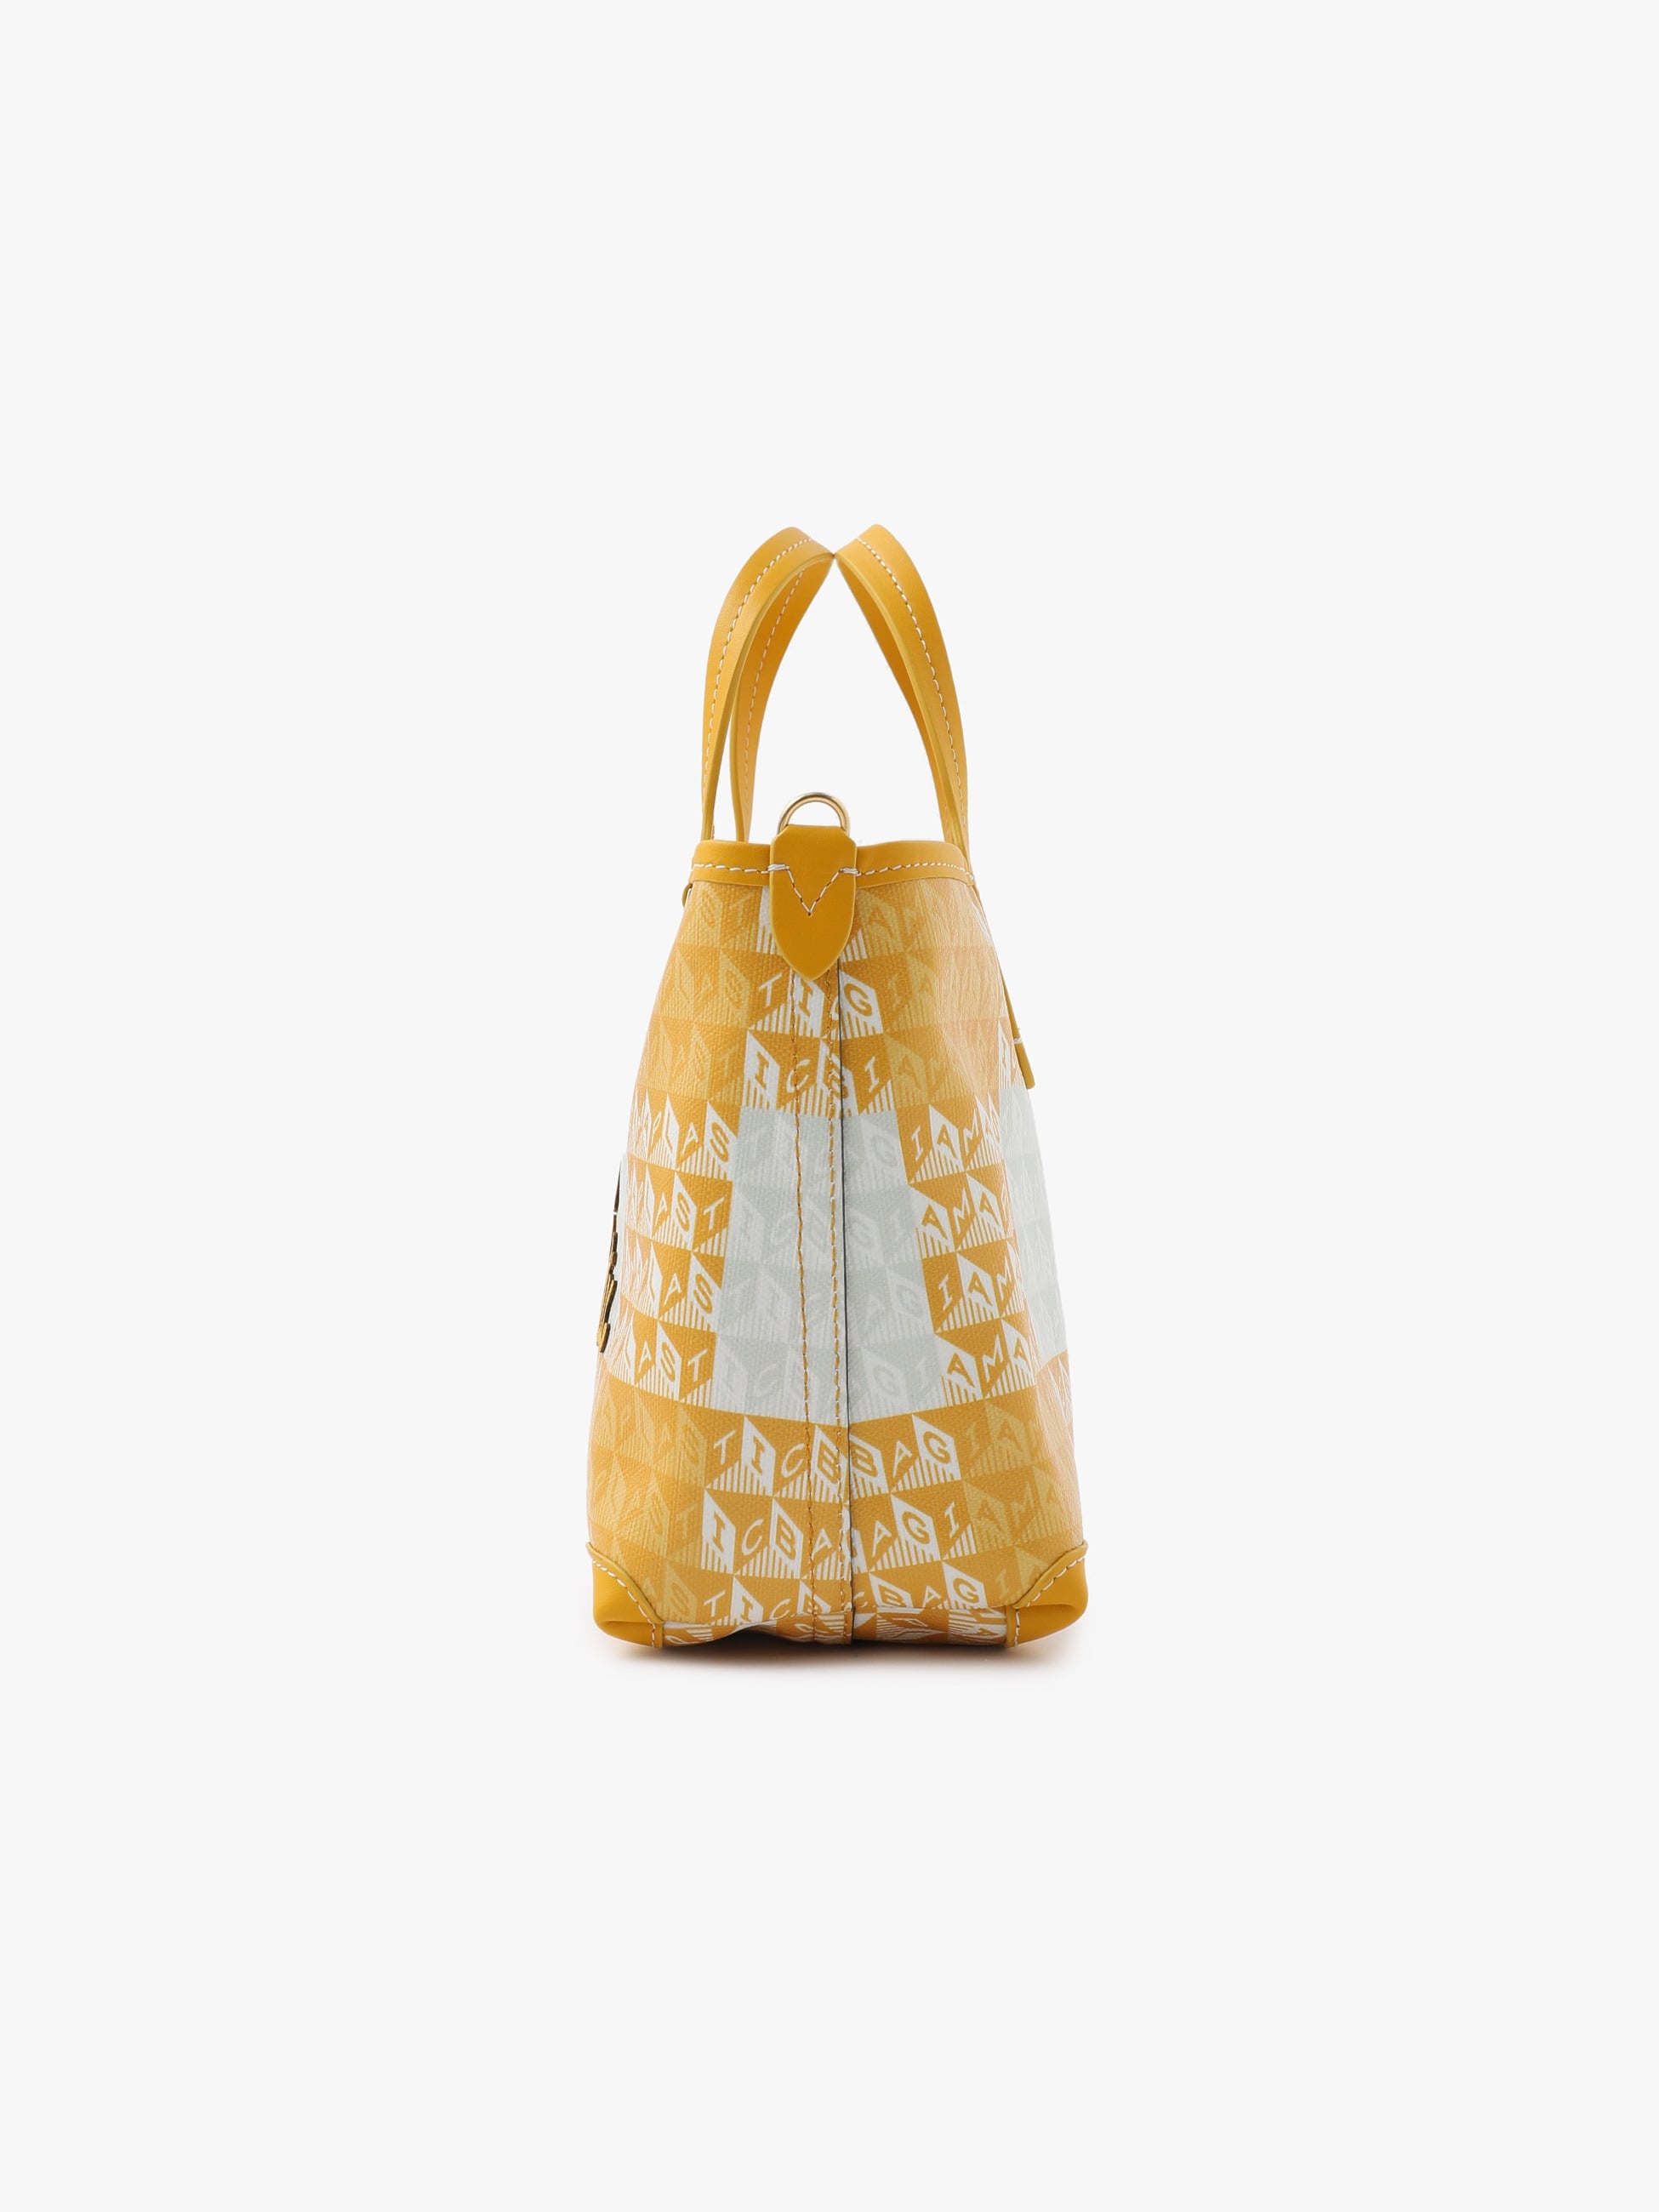 I am a Plastic Tote Bag Extra Small (yellow/blue)｜Anya Hindmarch 